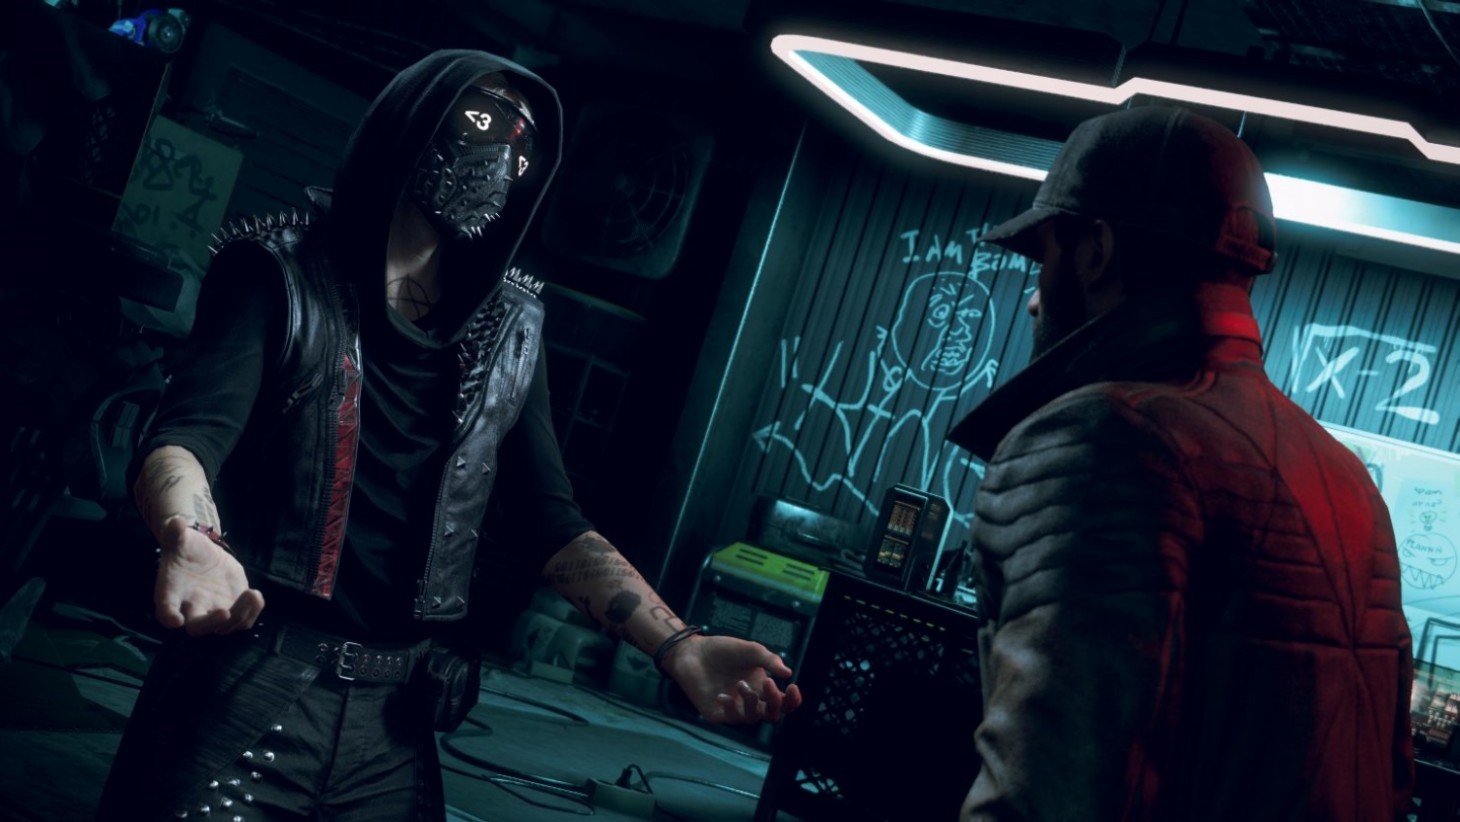 Watch Dogs: Legion Online shows how empty an open world can feel